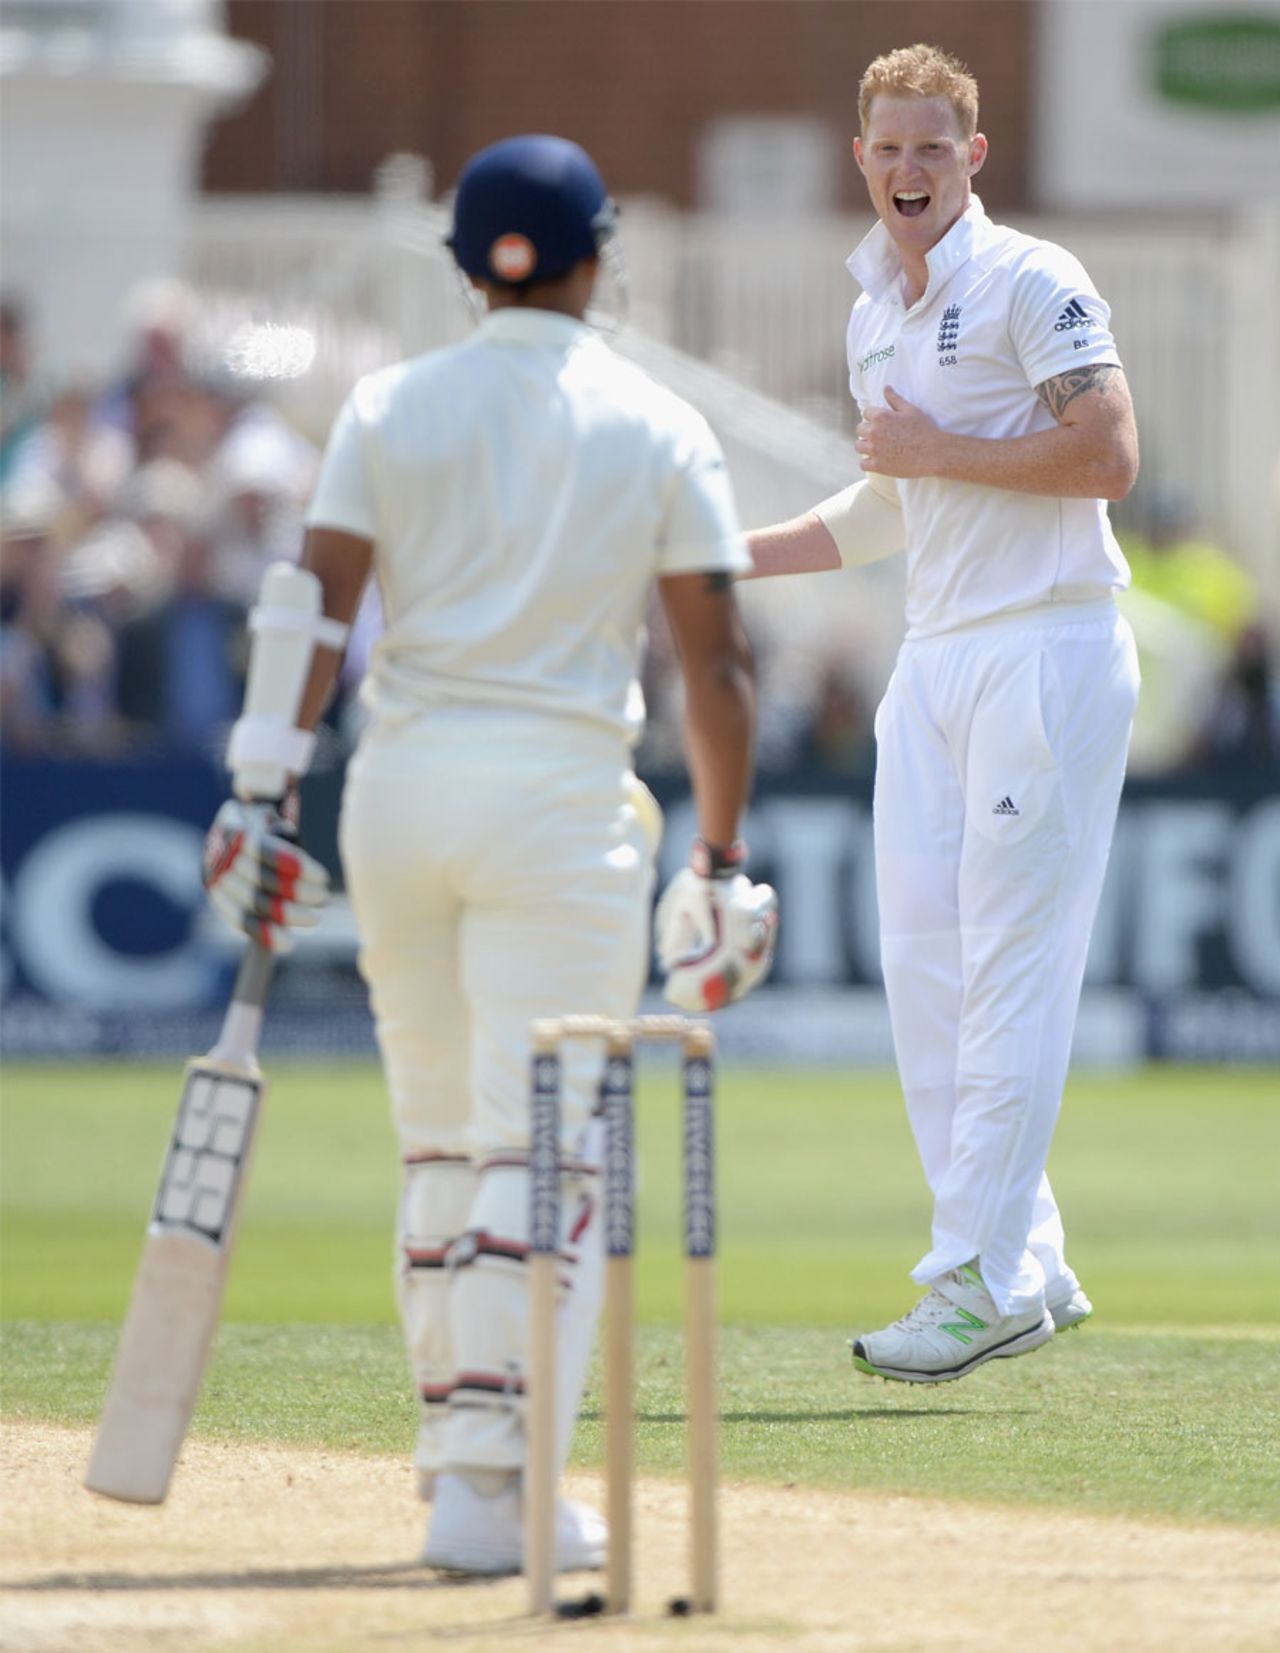 Ben Stokes snapped up Stuart Binny with a teaser outside off, England v India, 1st Investec Test, Trent Bridge, 2nd day, July 10, 2014